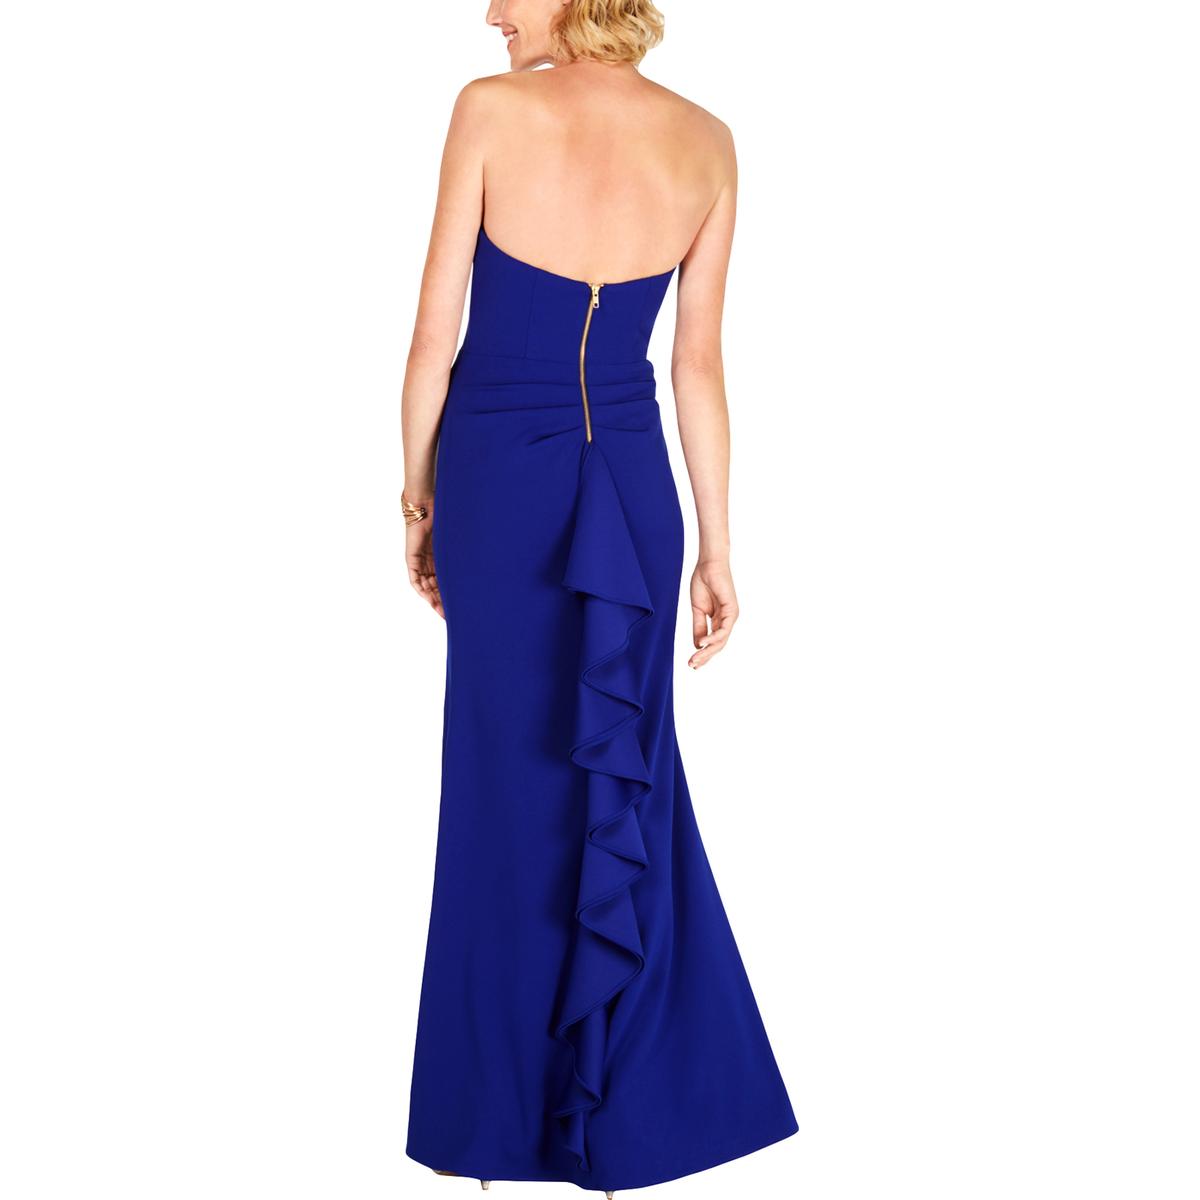 Betsy & Adam Womens Blue Formal Strapless Crepe Evening Dress Gown 8 ...